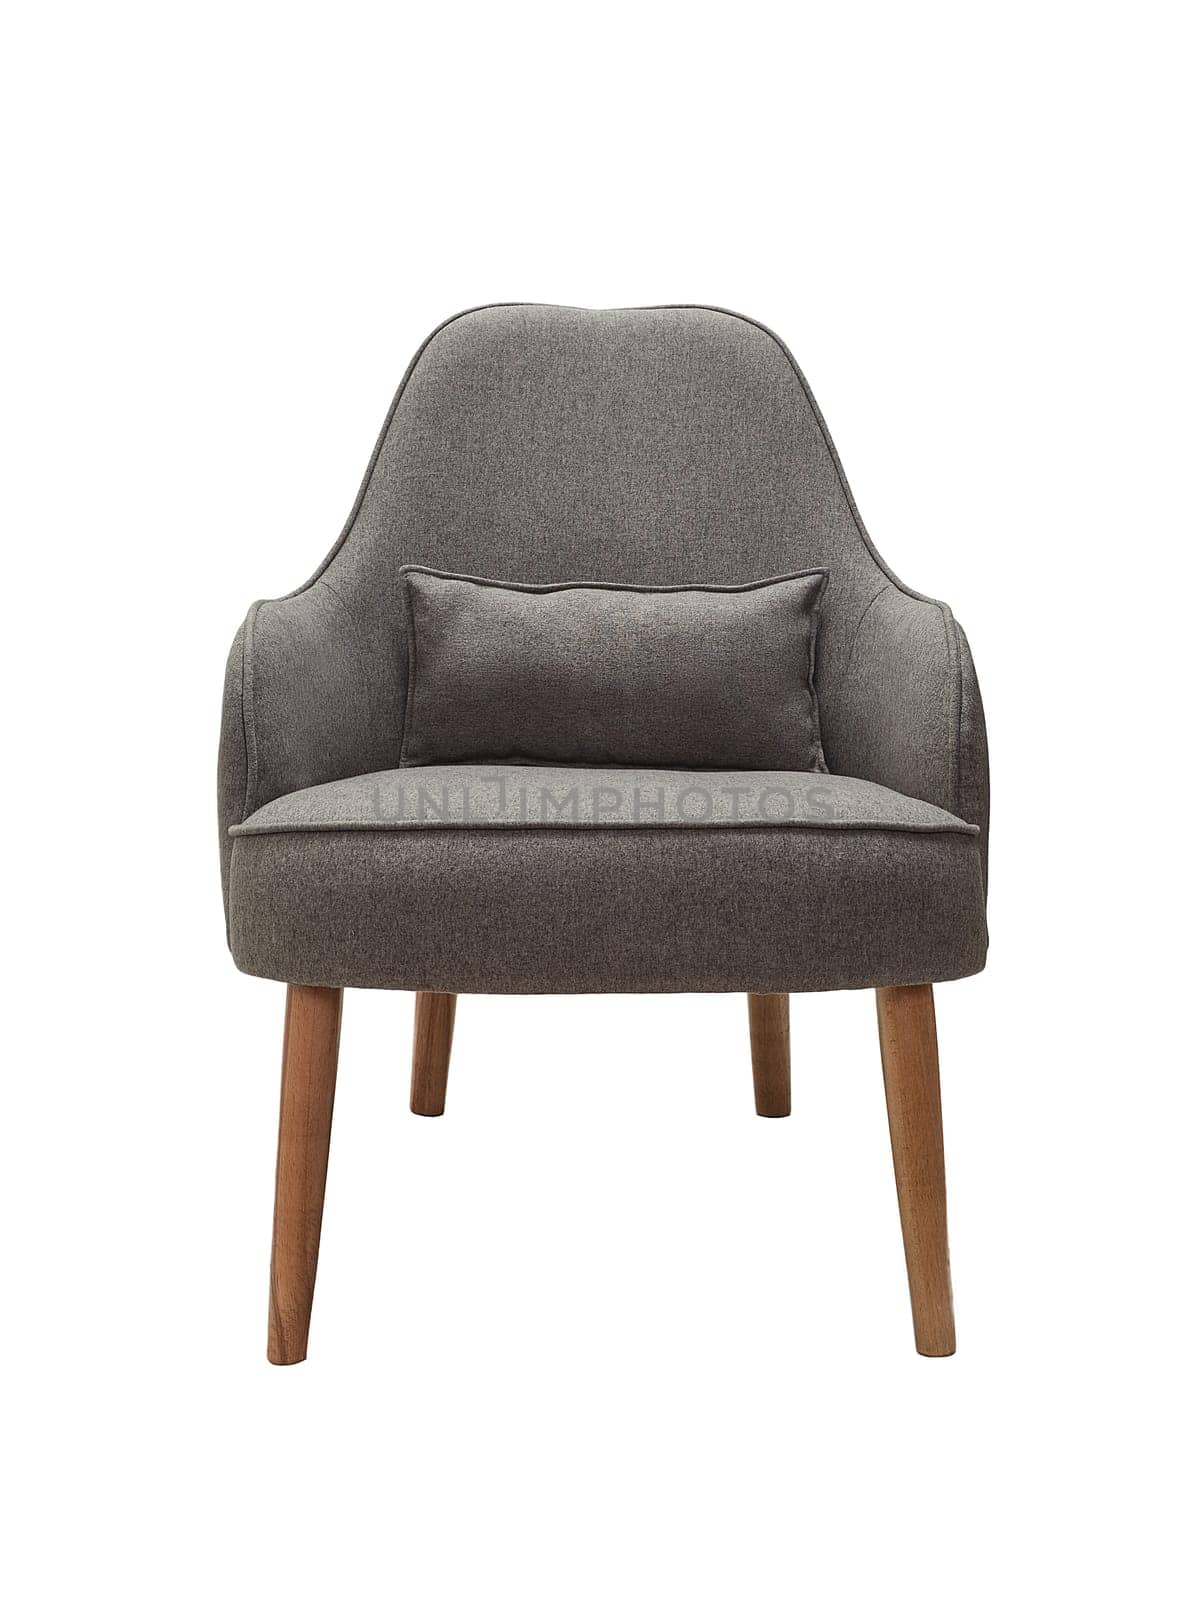 modern fabric grey armchair with wooden legs isolated on white background, front view.